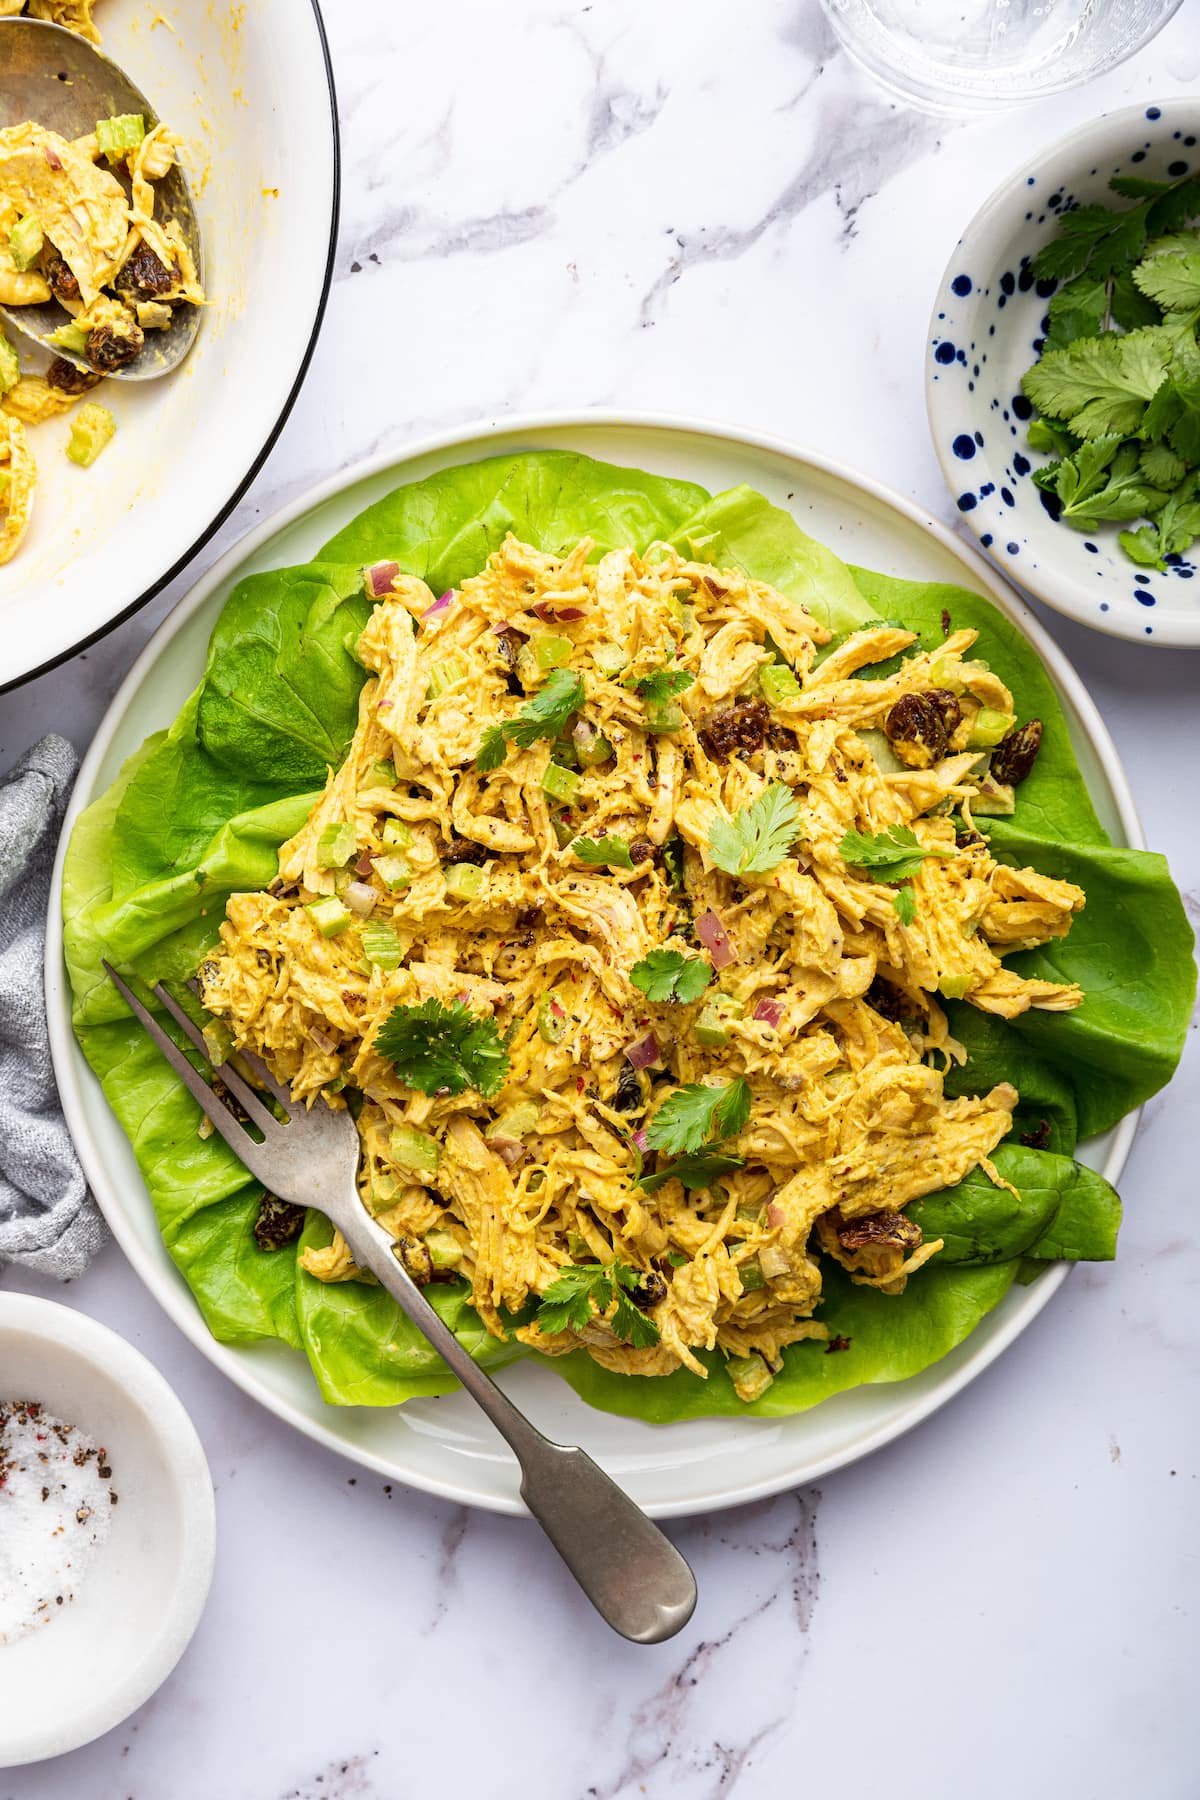 Curry chicken salad on a bed of lettuce.